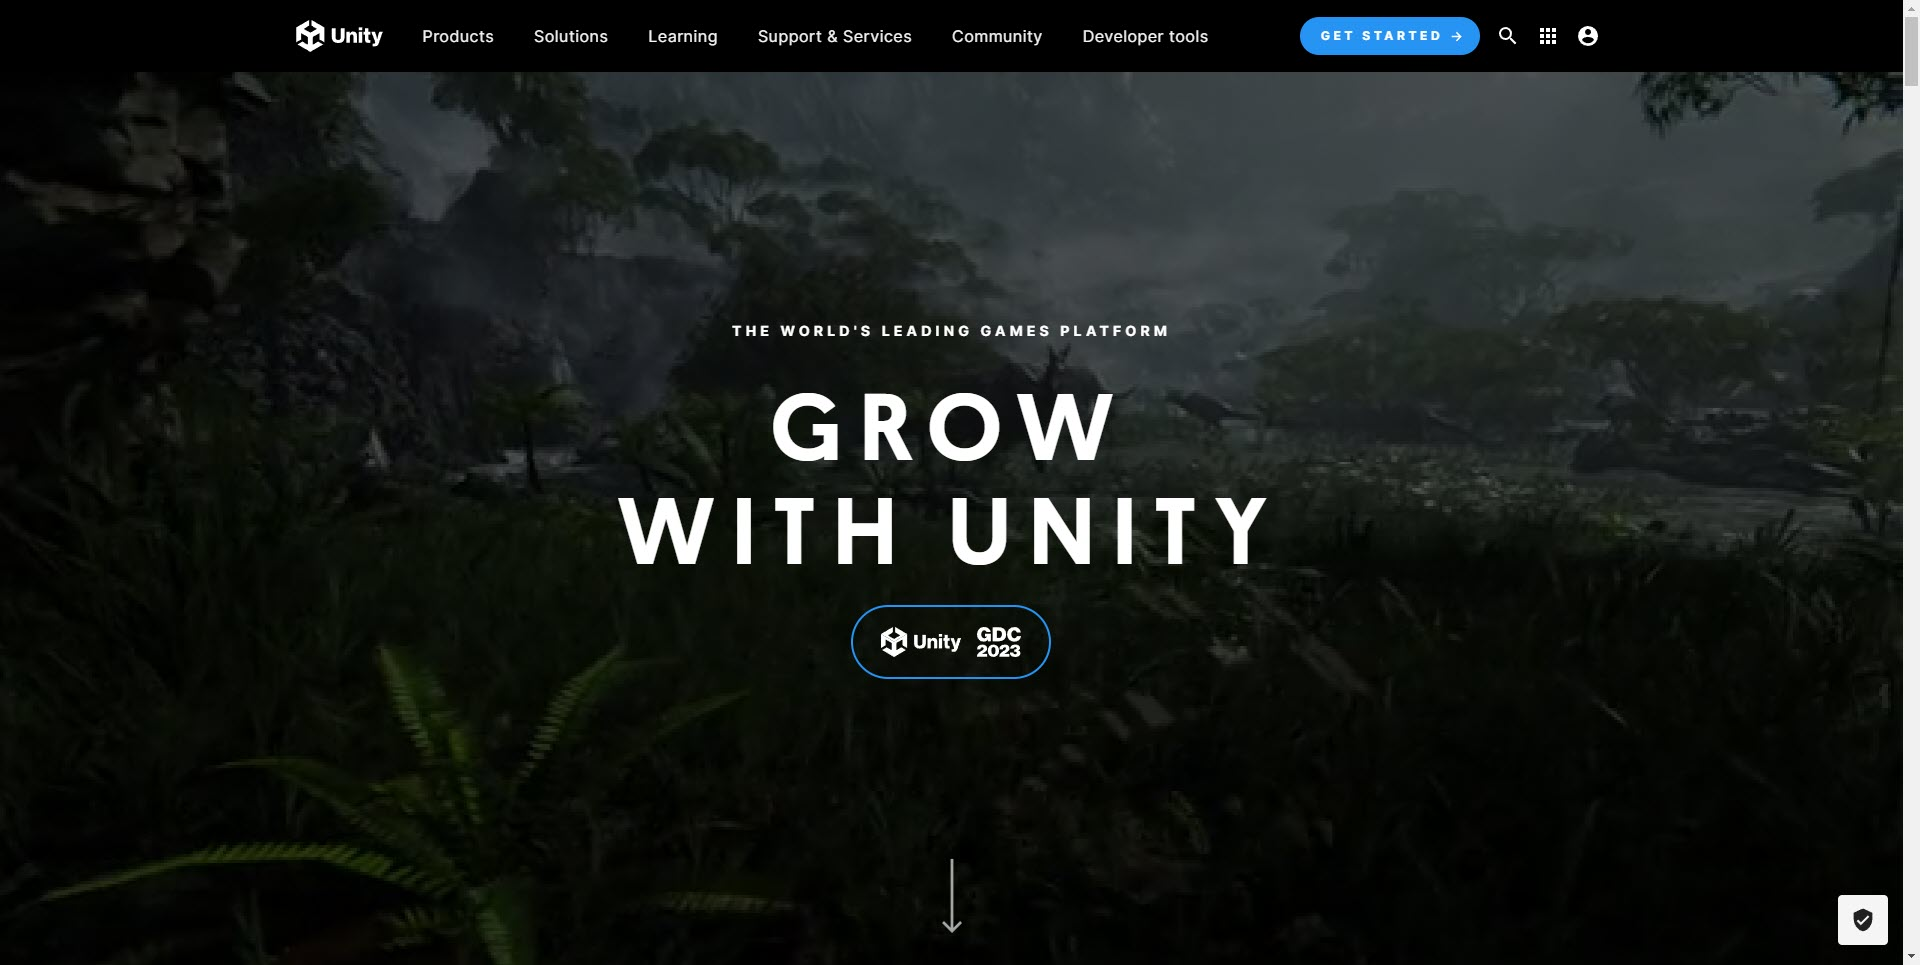 Unity Software provides a platform for creating and running 3D content in real-time.